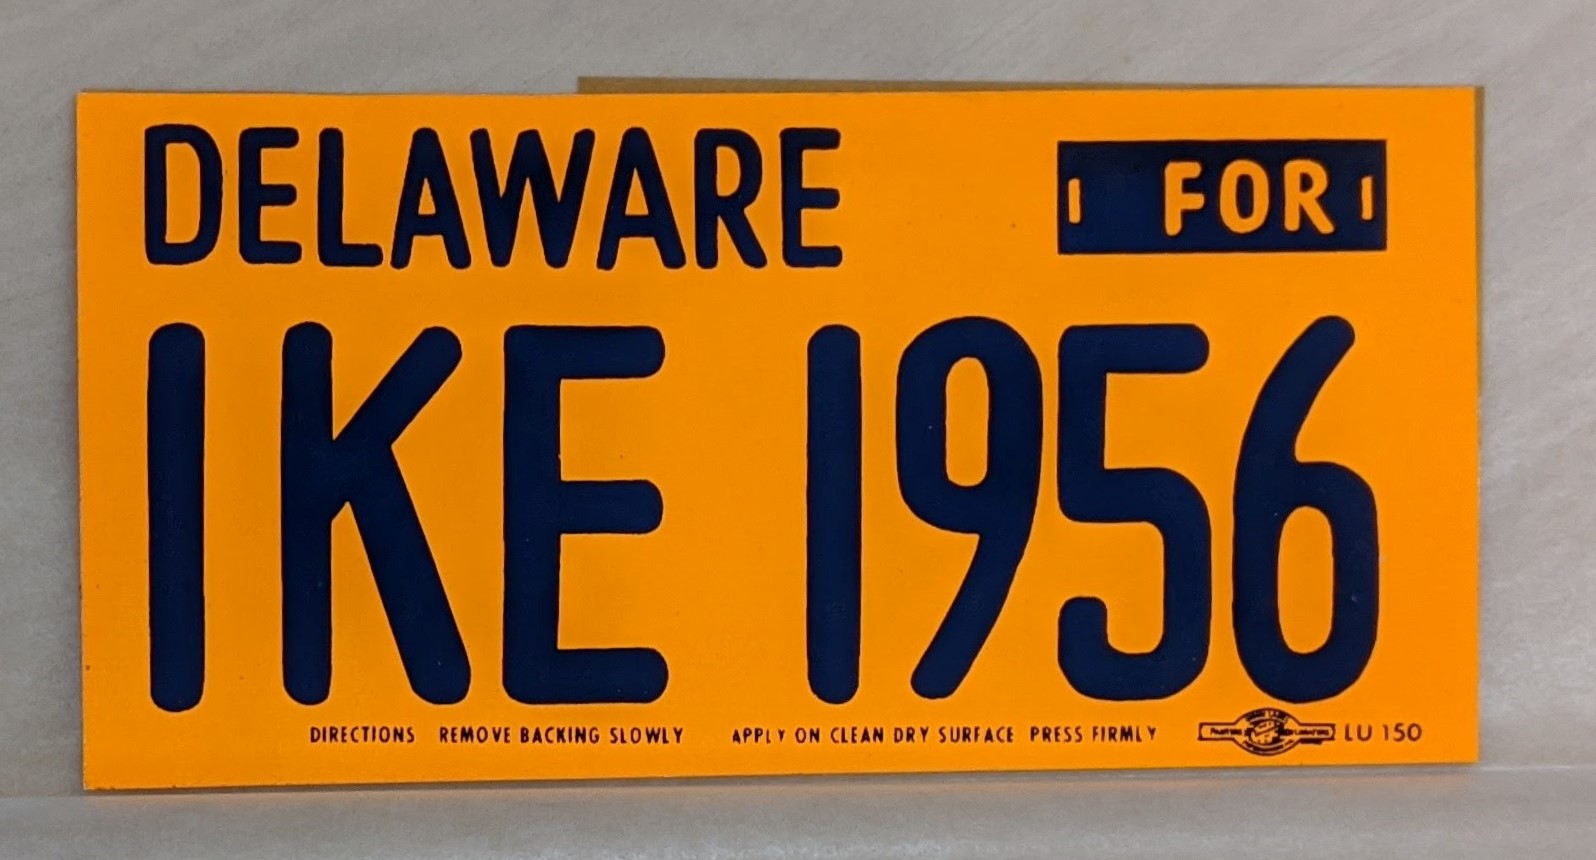 Creator unknown, “Delaware for Ike 1956” bumper sticker, 1956, from the Jerome O. Herlihy political campaign ephemera collection